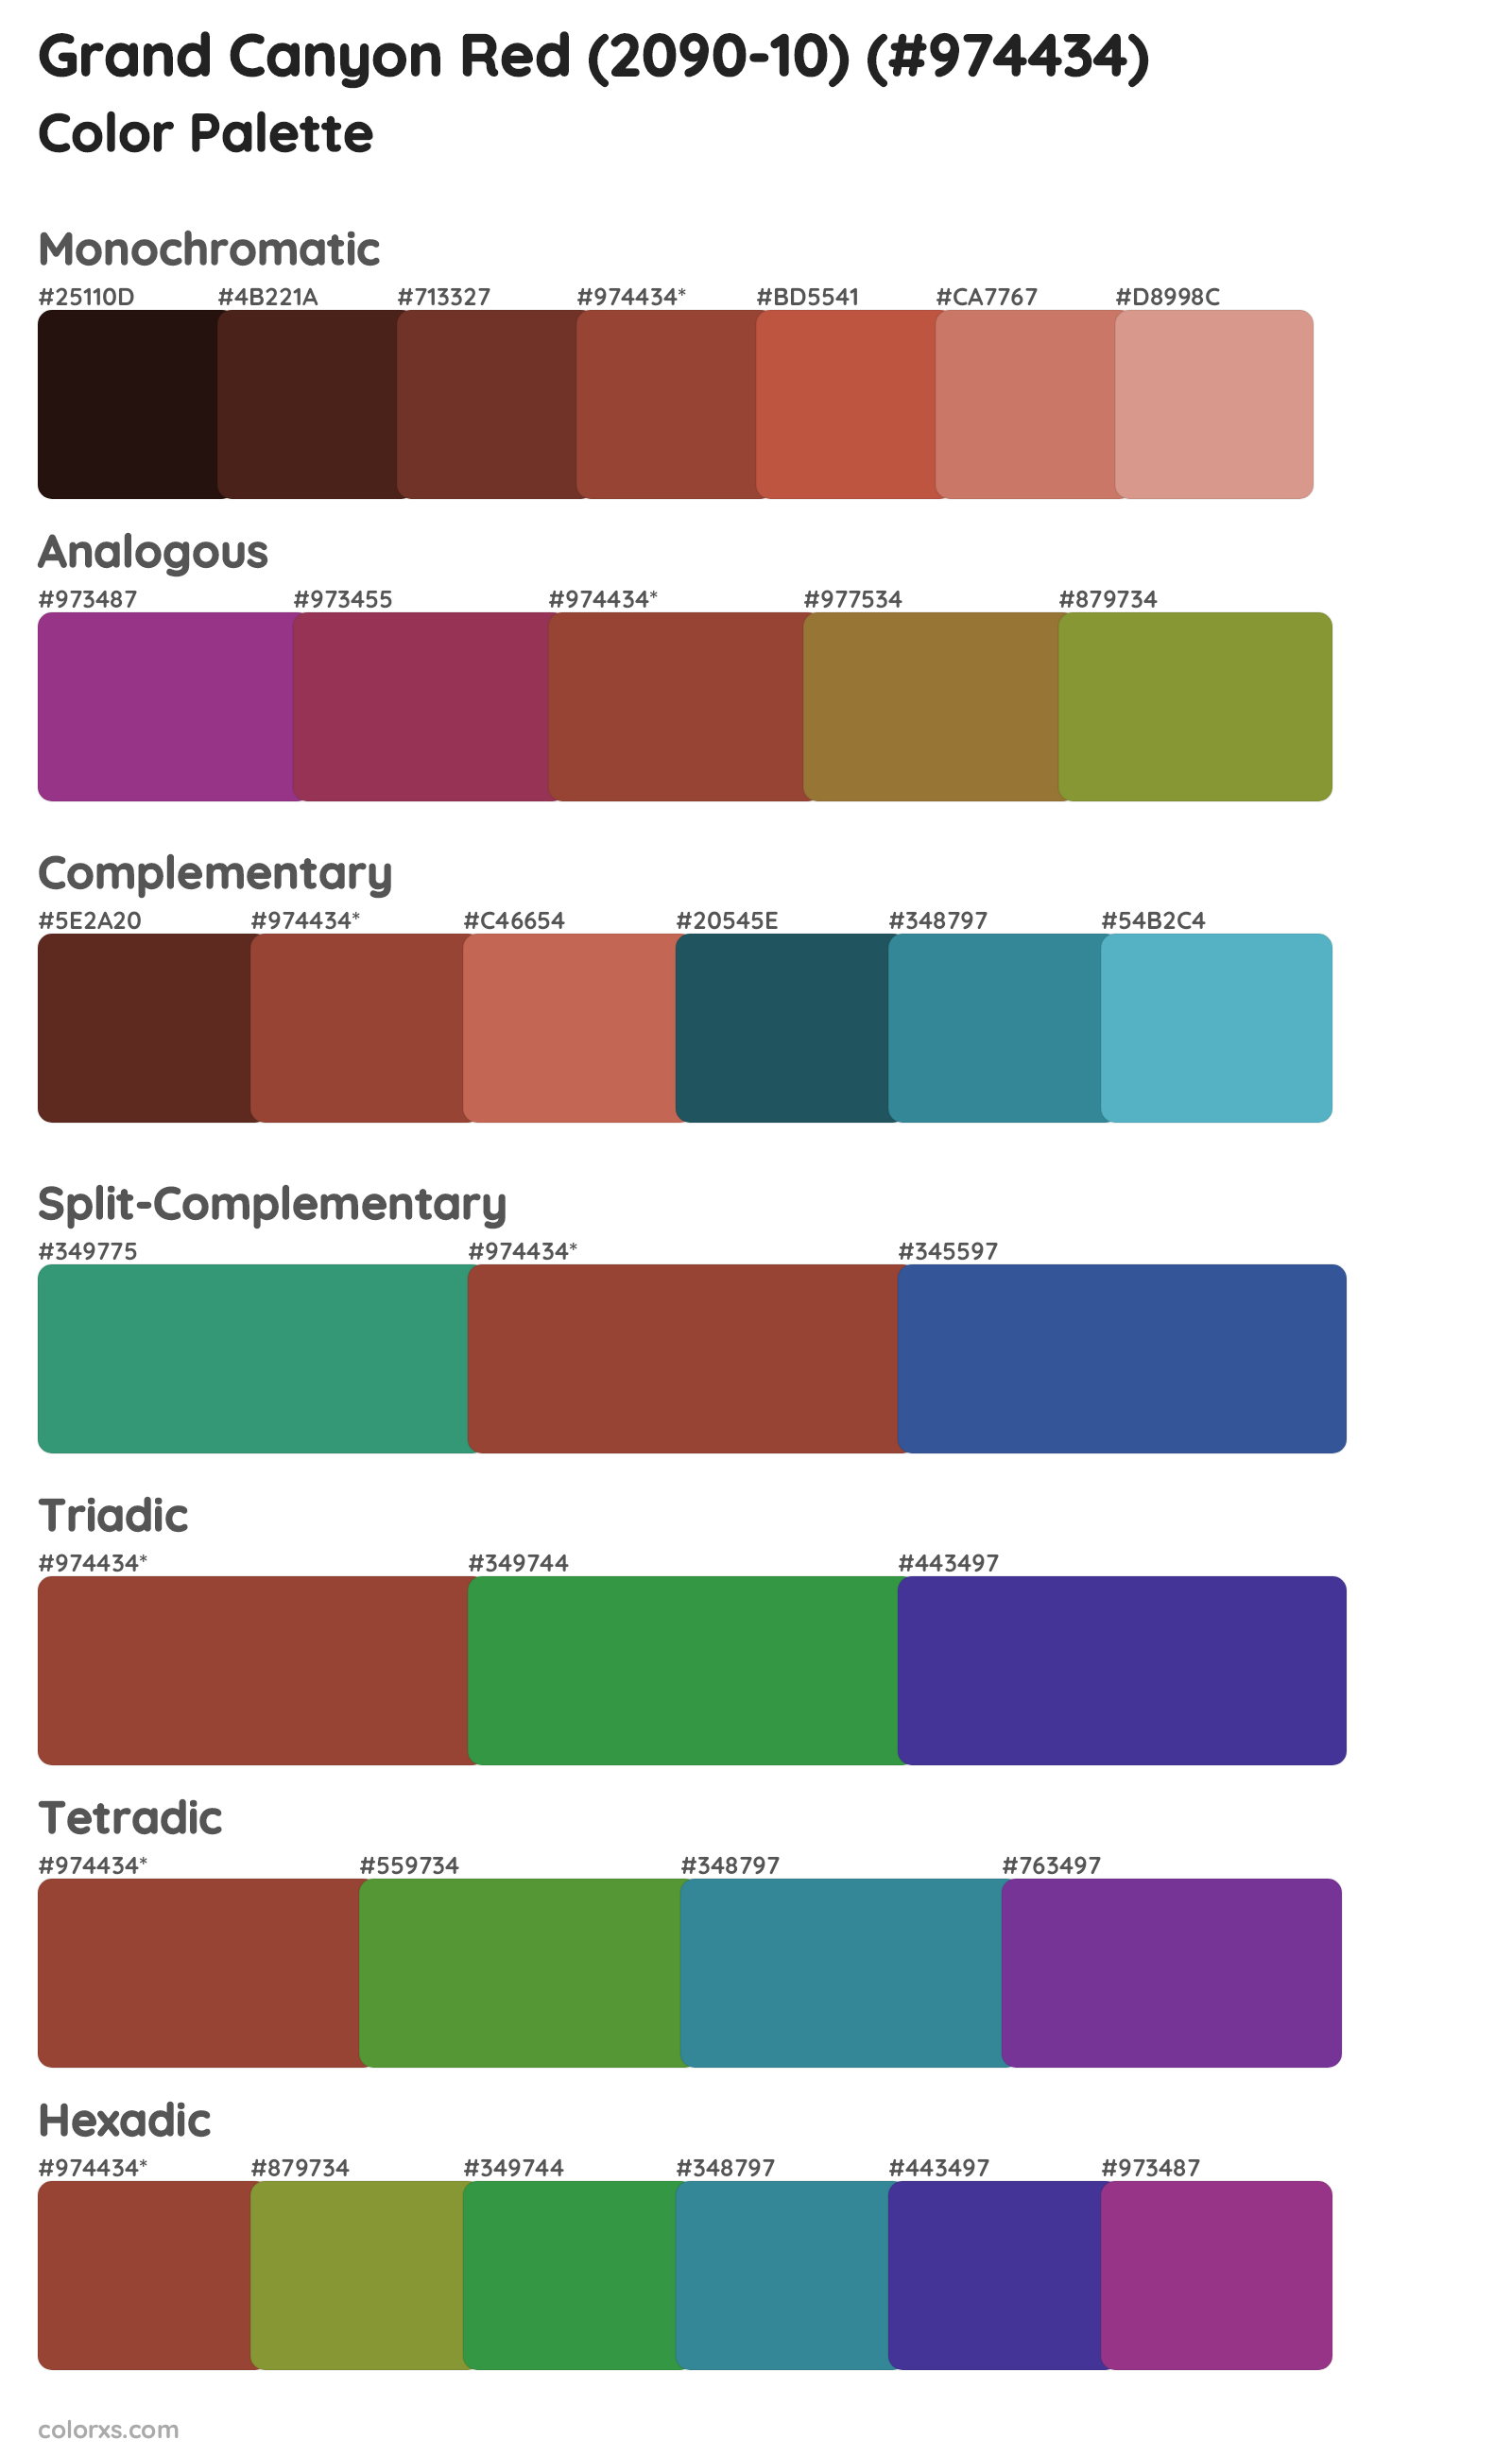 Grand Canyon Red (2090-10) Color Scheme Palettes